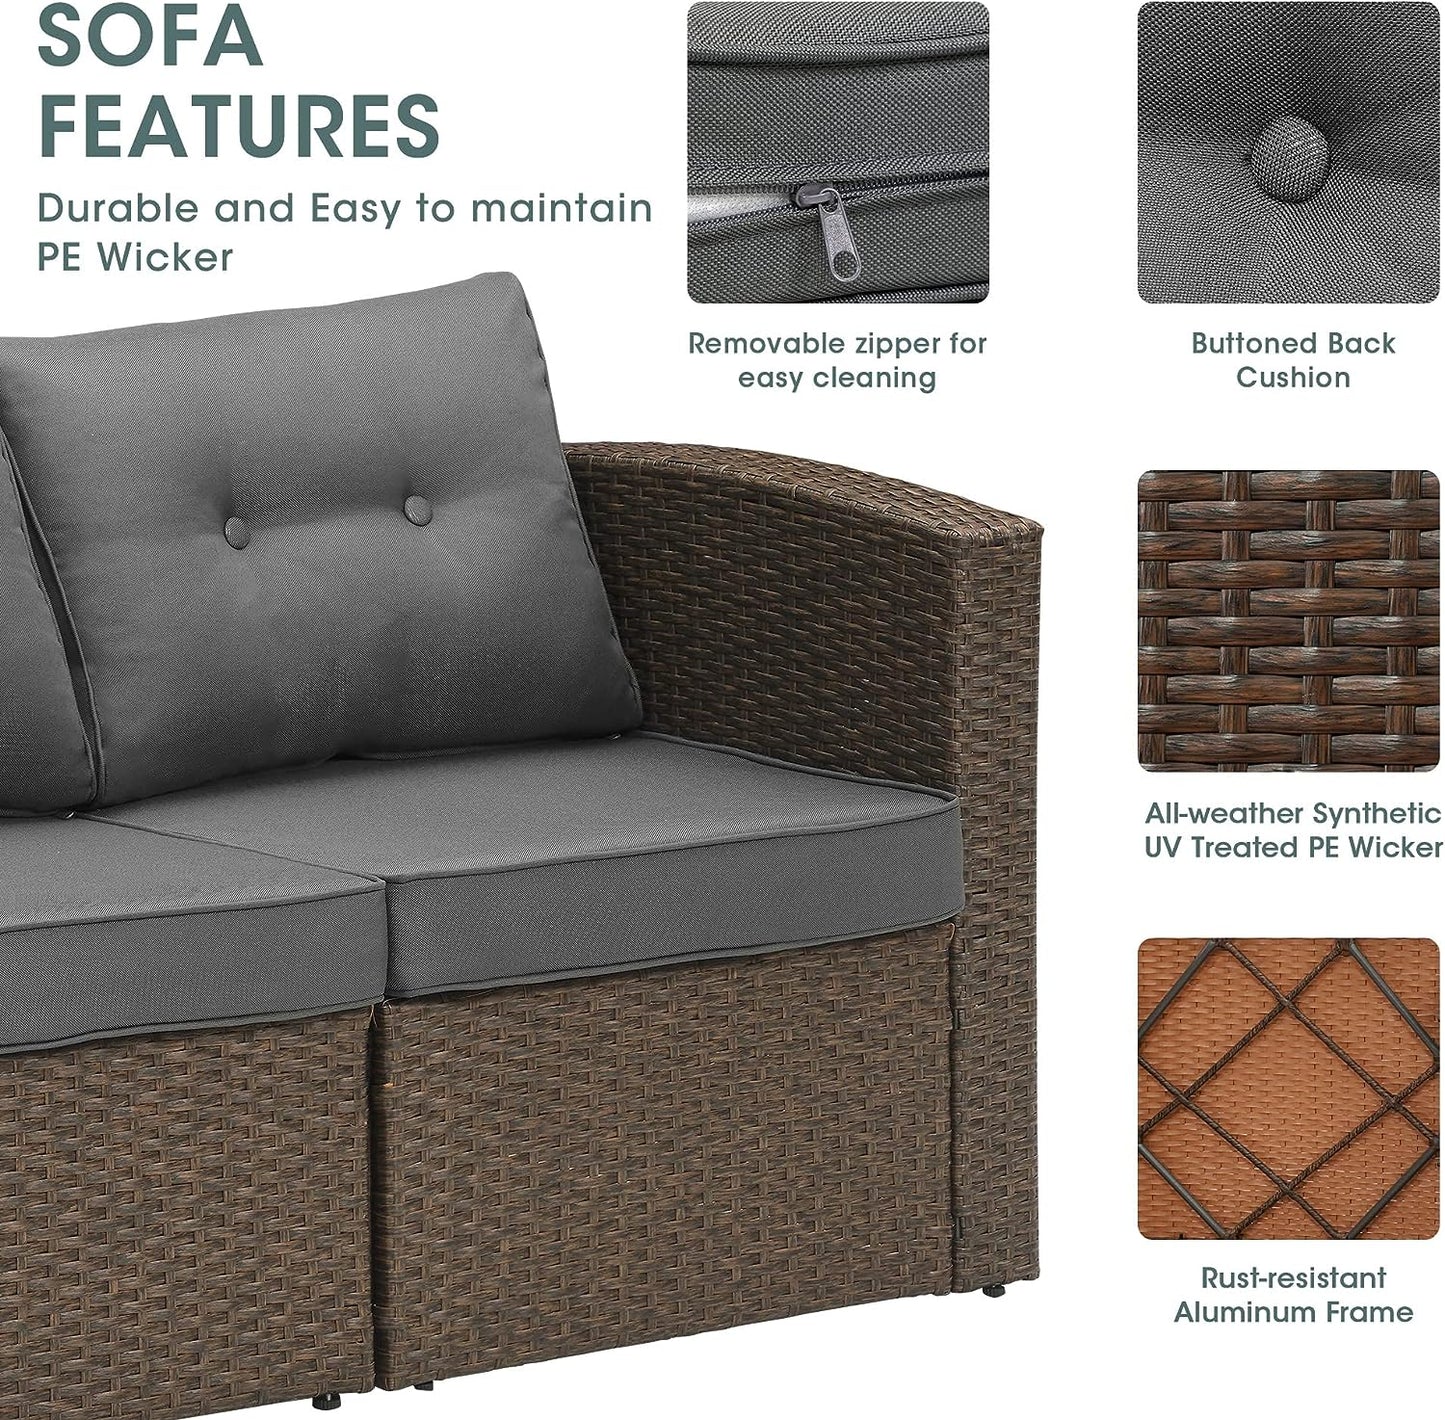 Outdoor Loveseat Patio Furniture Corner Sofa, All-Weather Brown Wicker 2-Piece Rattan Outdoor Sectional Couch Sofa Set with Dark Grey Non-Slip Cushions,Aluminum Frame